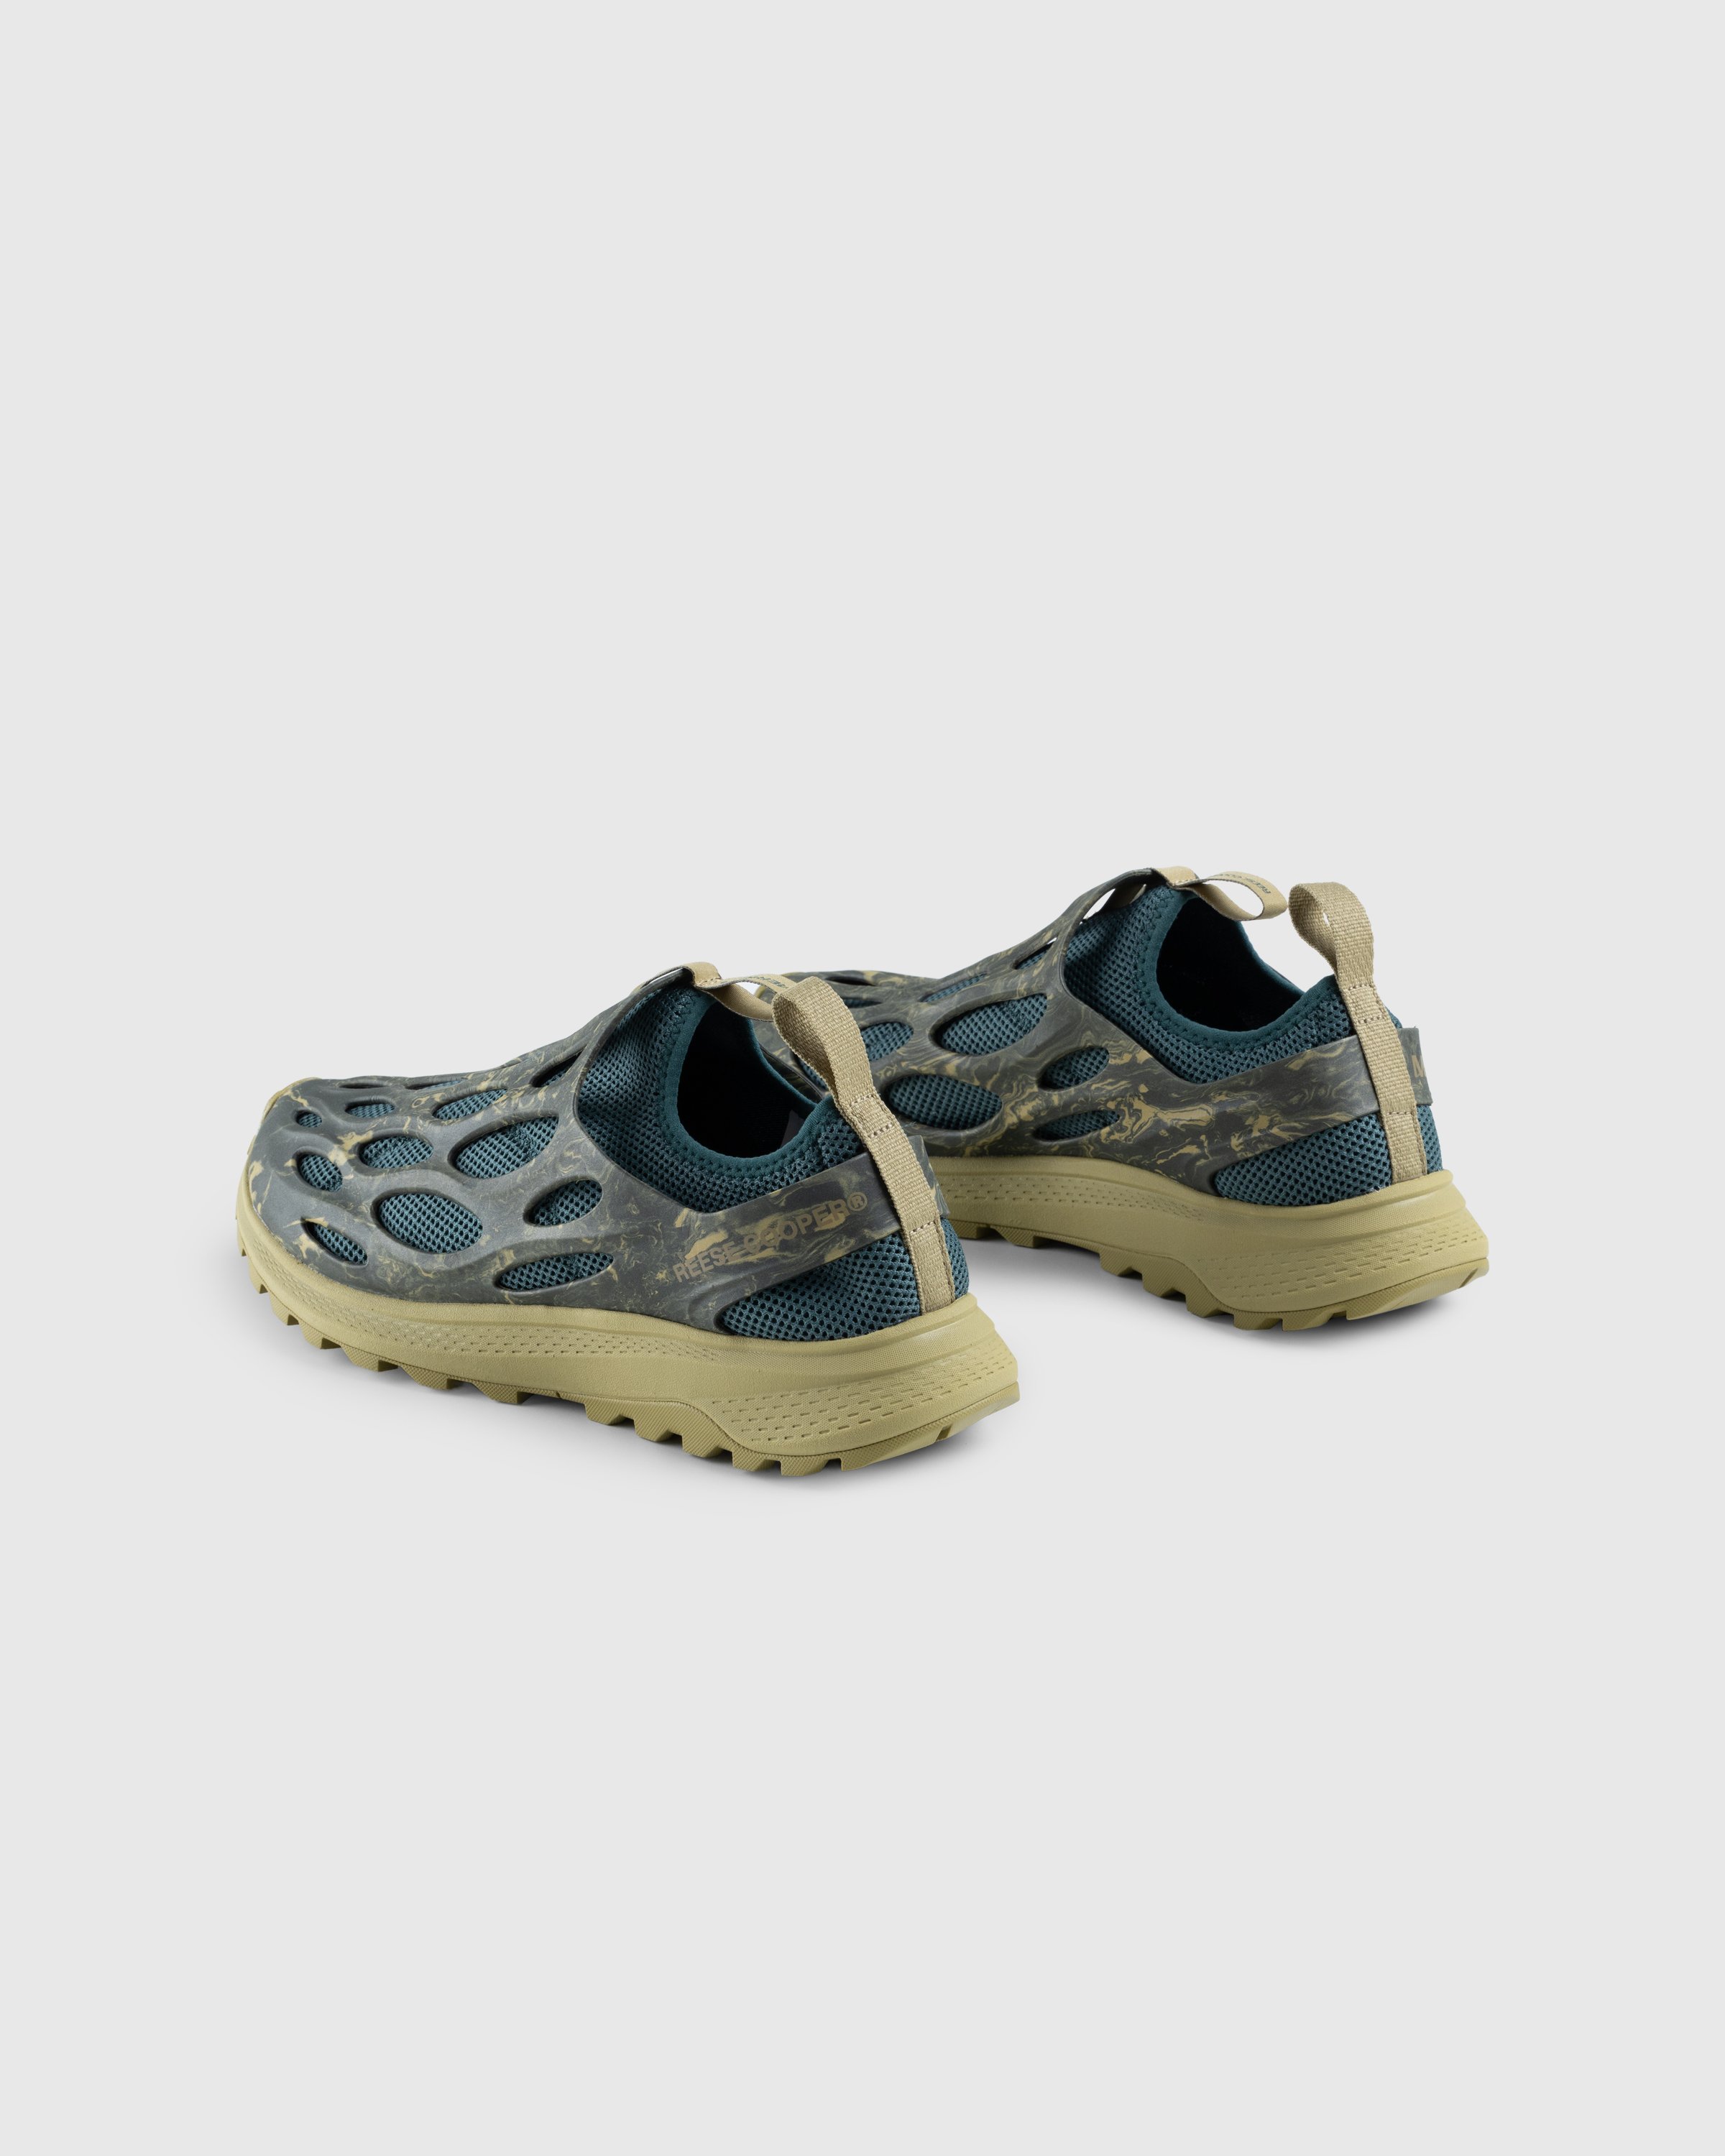 Merrell x Reese Cooper - Hydro Runner Forest Night - Footwear - Green - Image 4